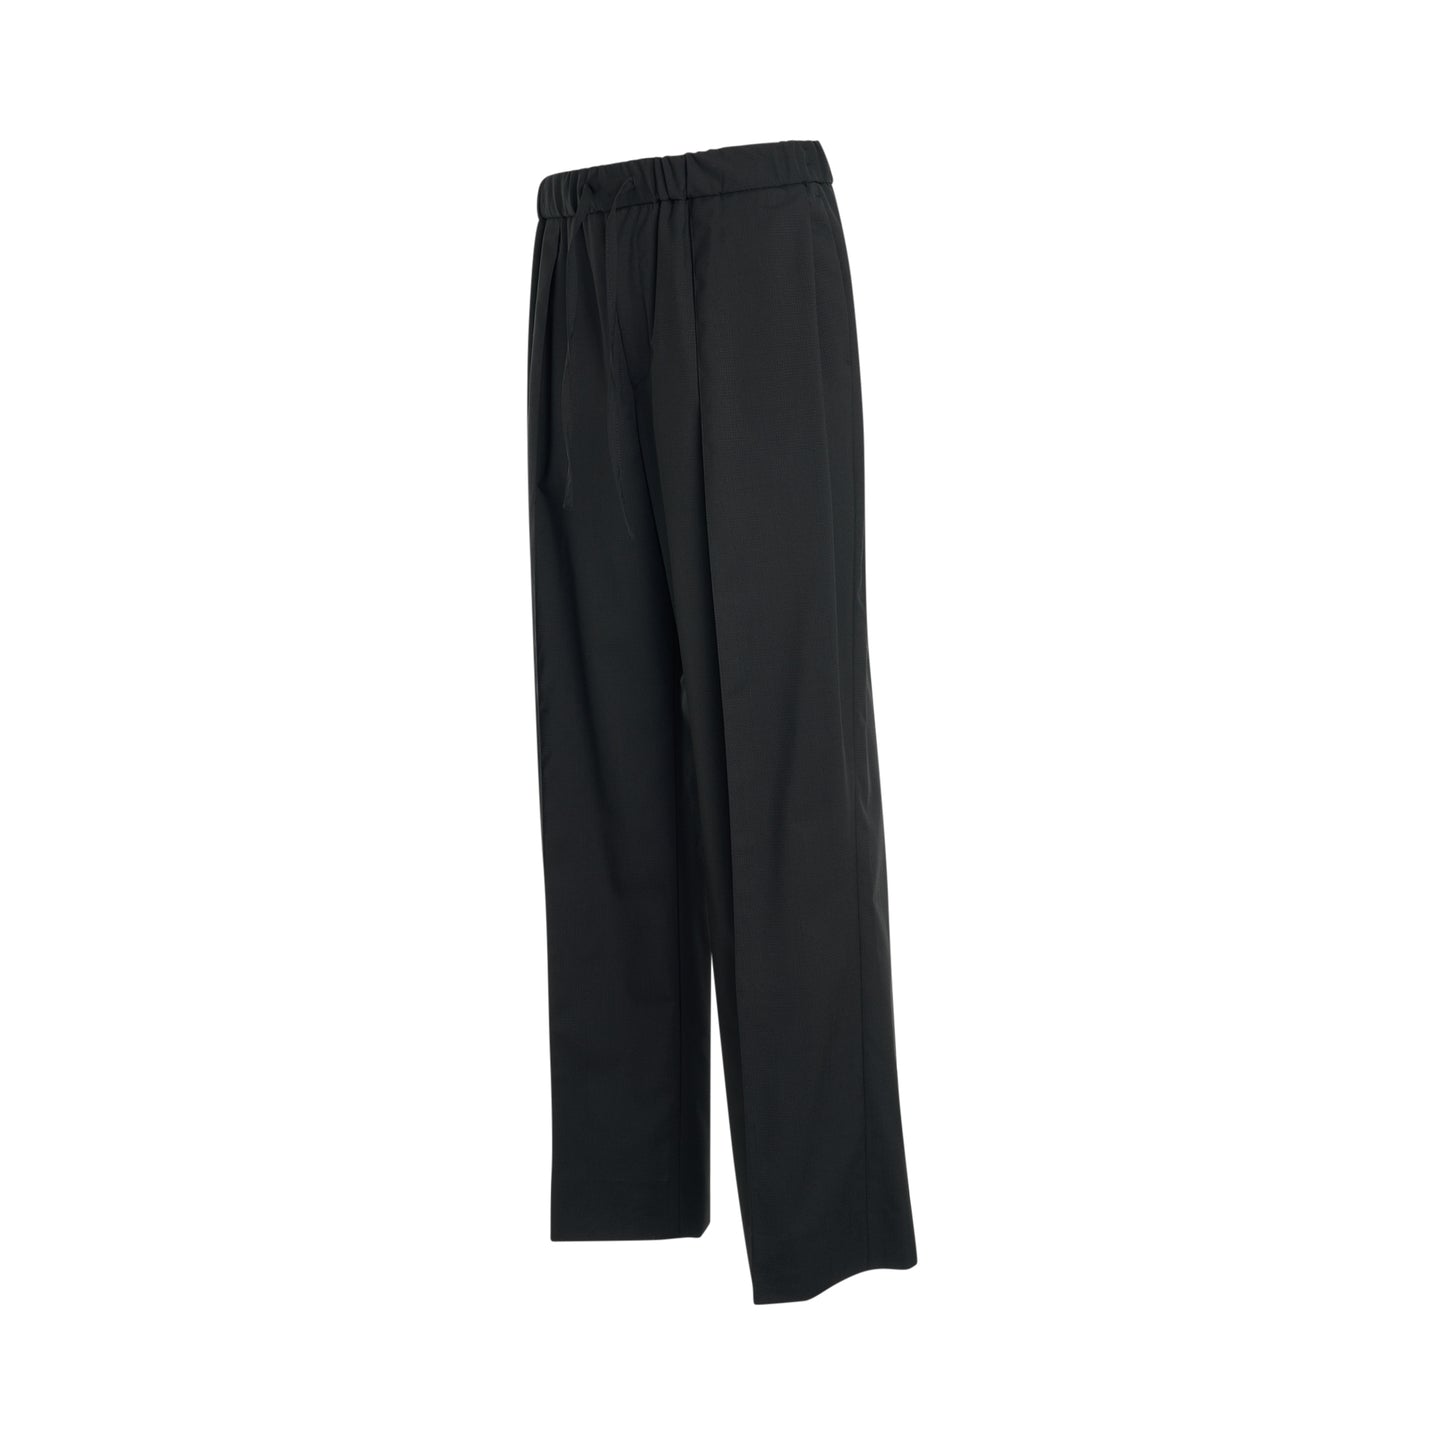 Wool Relaxed Fit Pants in Black